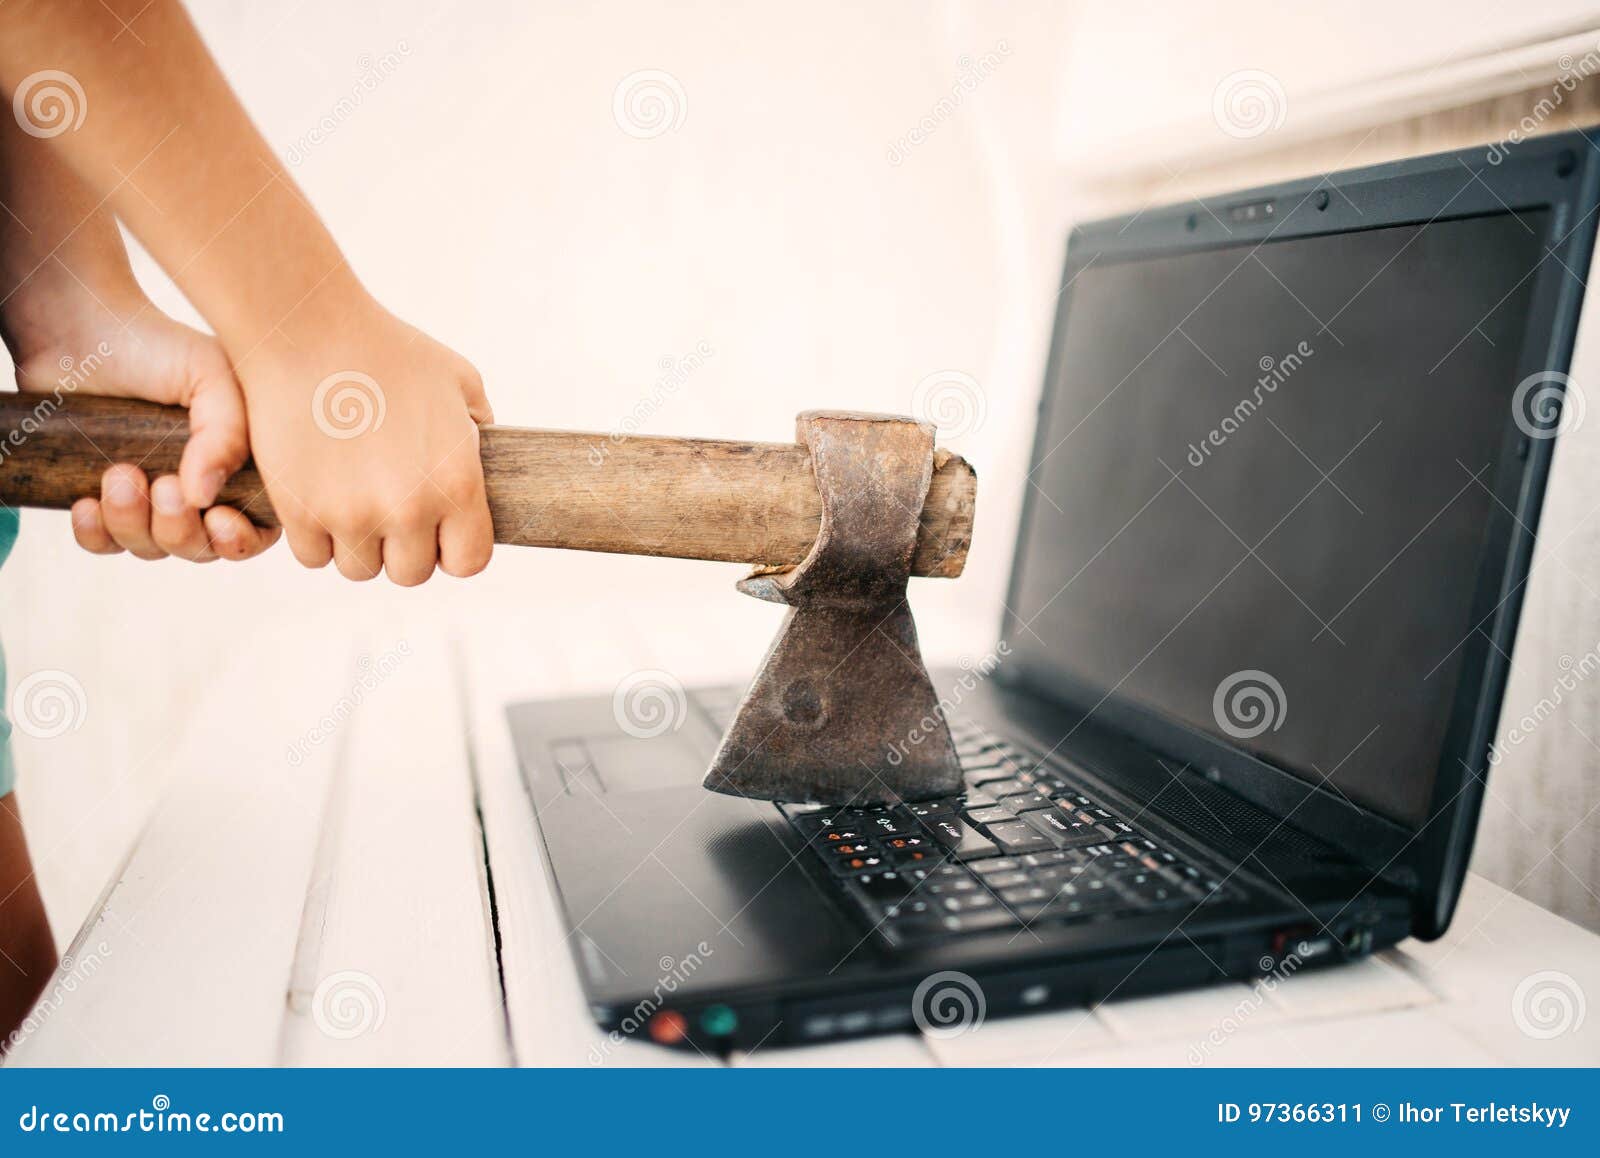 hands with an ax and a laptop